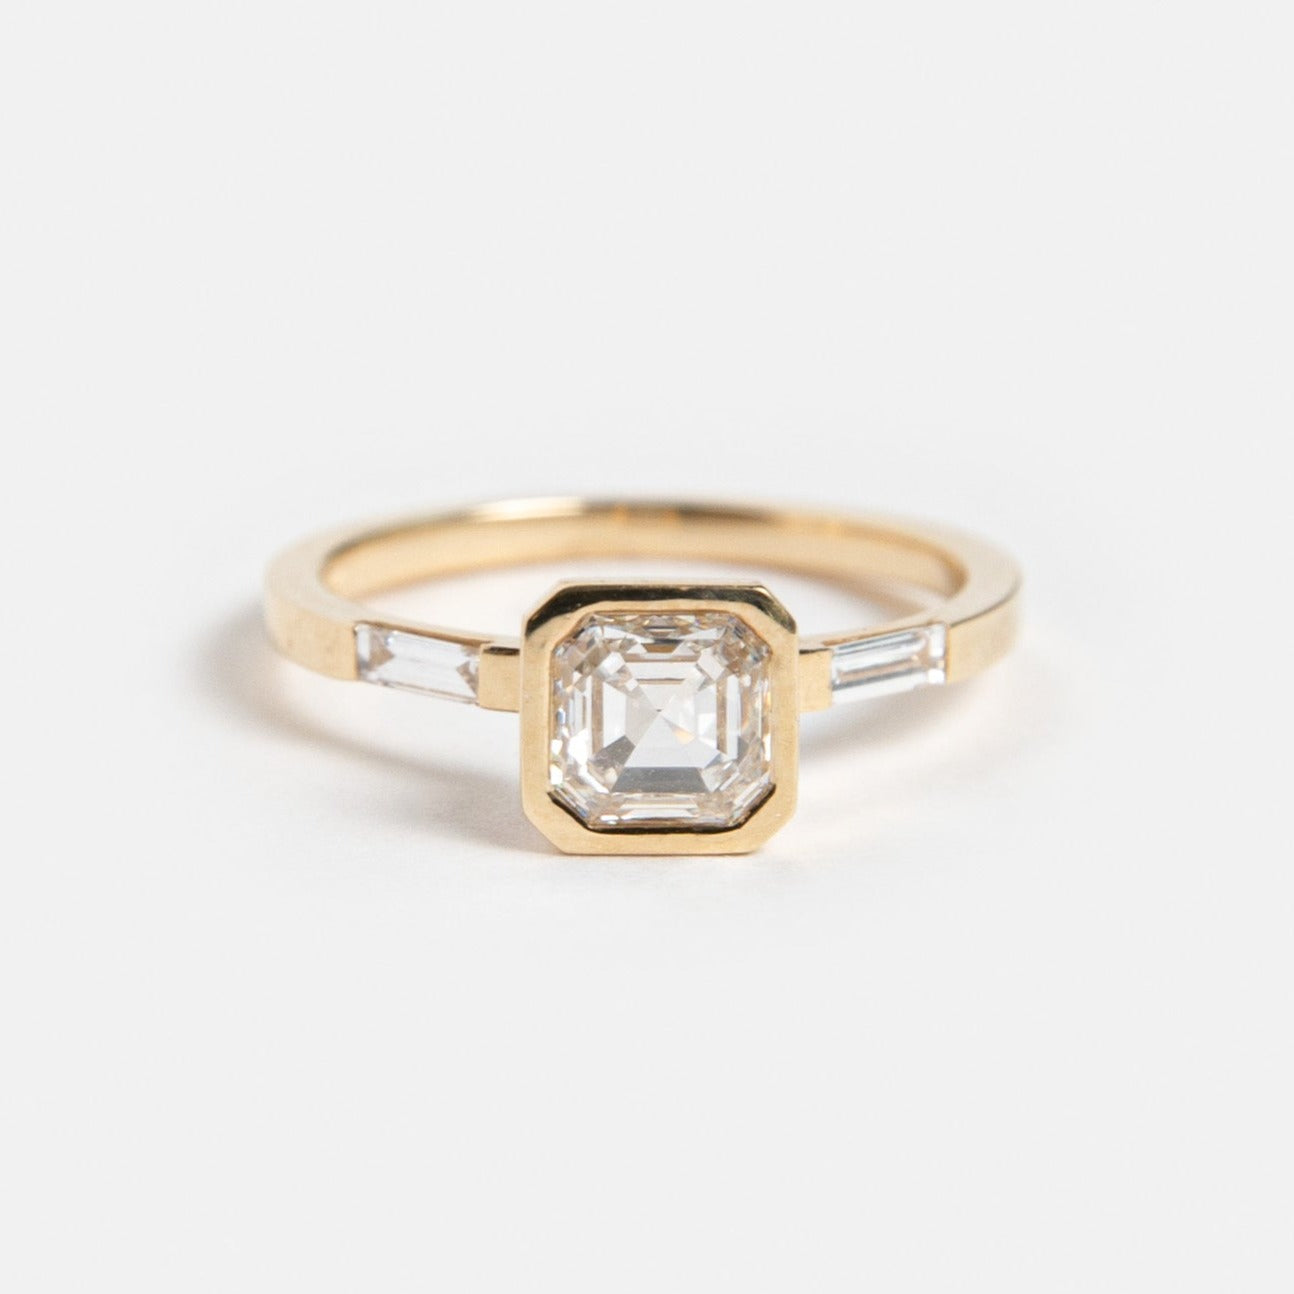 Aida Designer Ring in 14 Karat Yellow Gold set with a square cut lab-grown diamond and two baguette cut lab-grown diamonds By SHW Fine Jewelry New York City